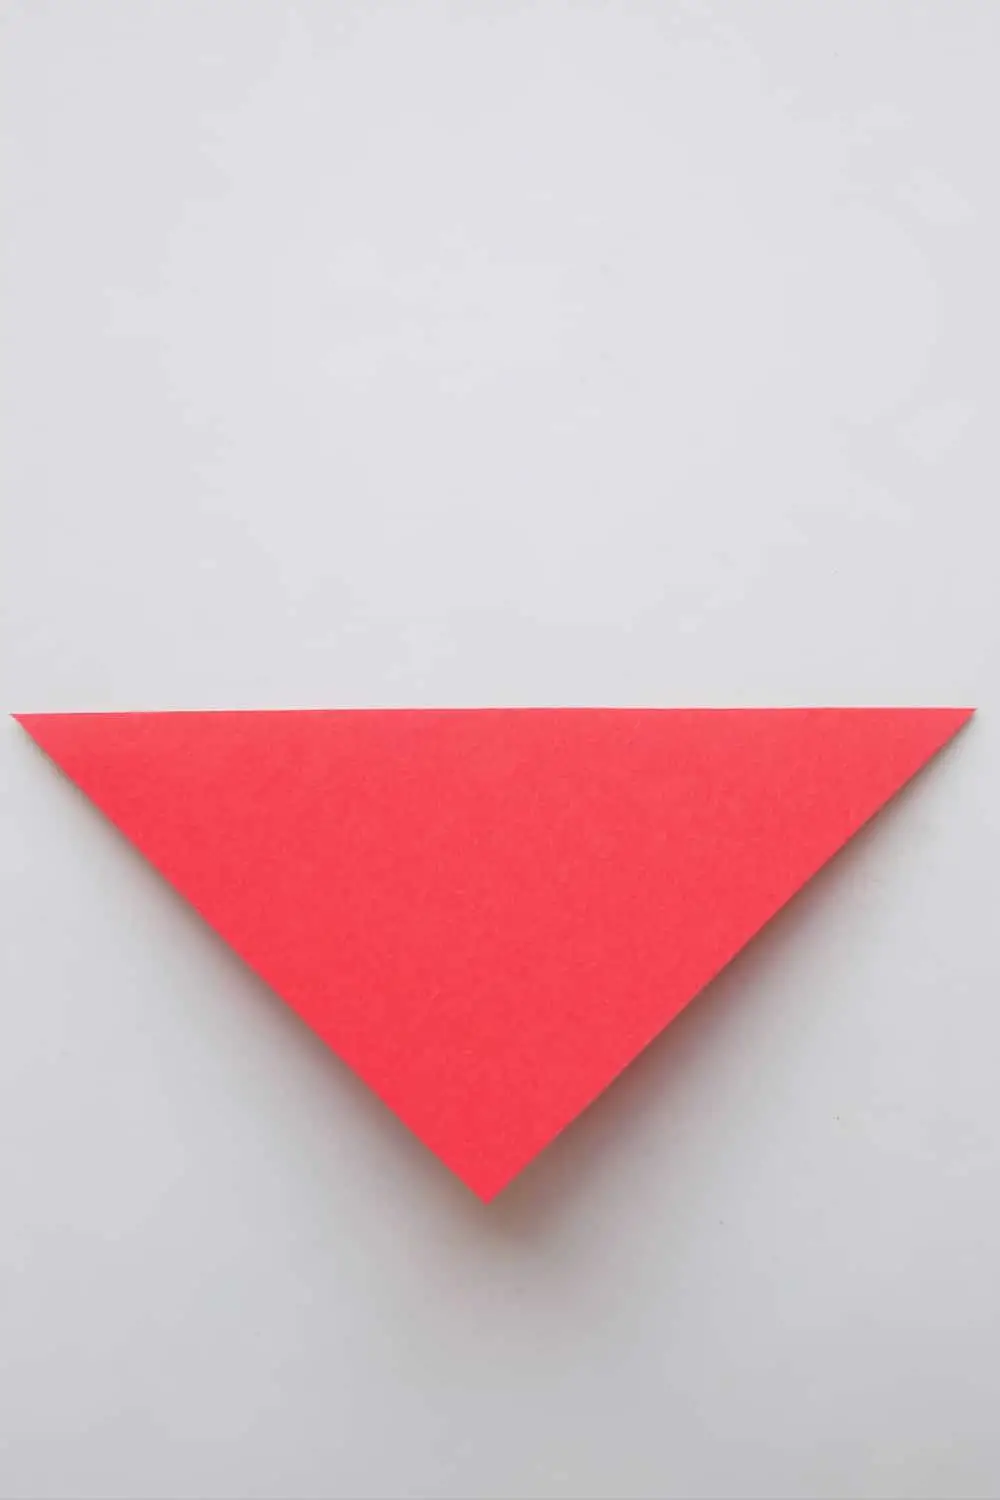 Red paper triangle